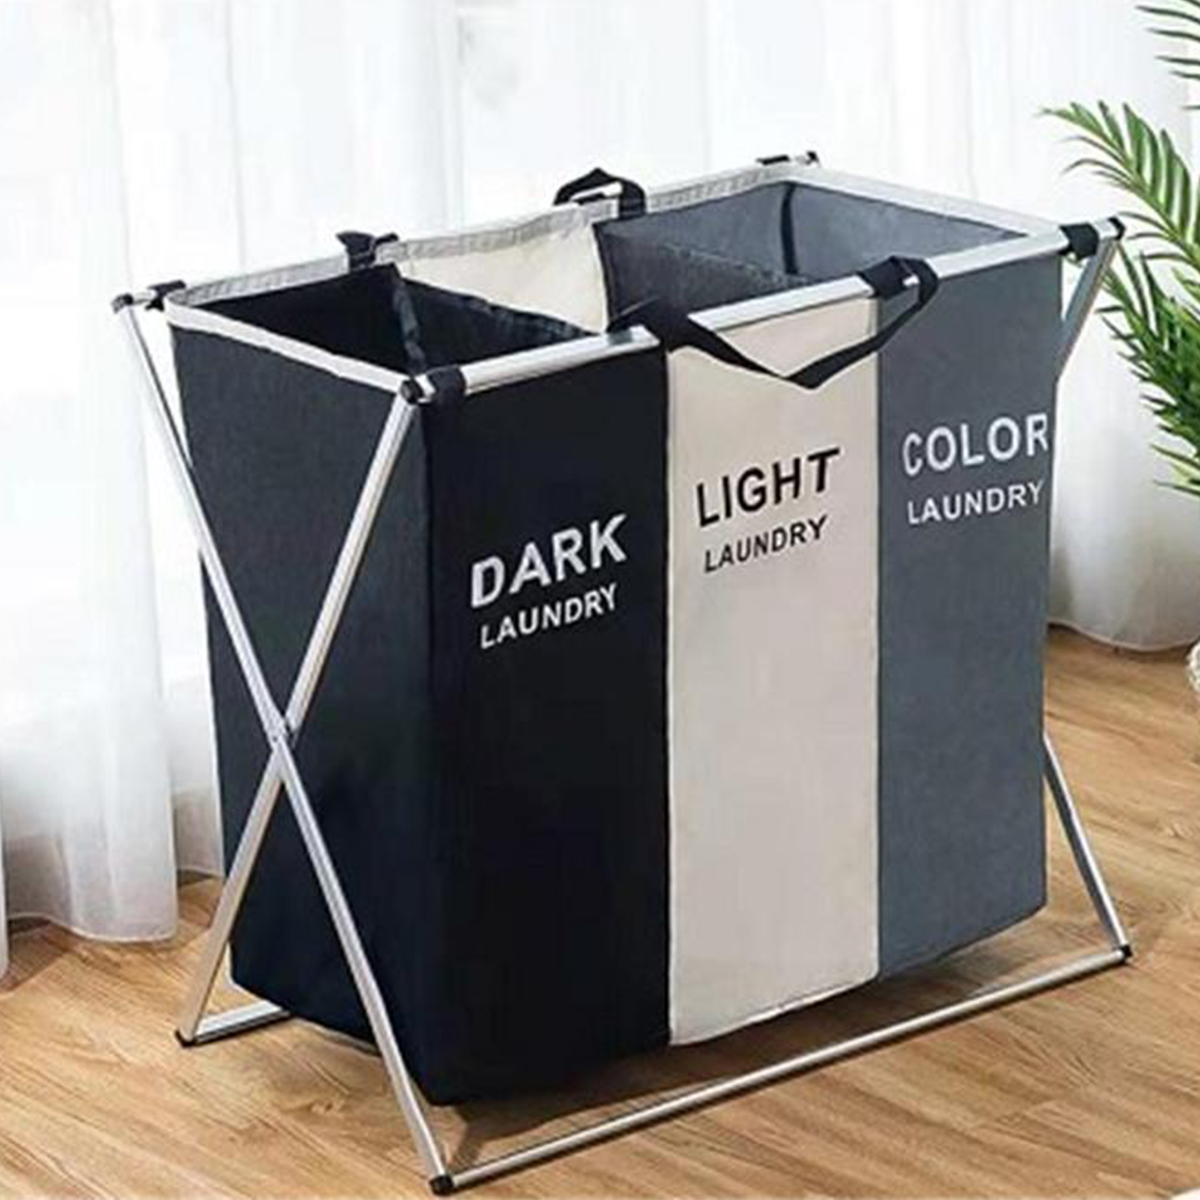 

X-Shape Foldable Dirty Laundry Basket Organizer Printed Collapsible Three Grid Home Laundry Hamper Sorter Laundry Storag